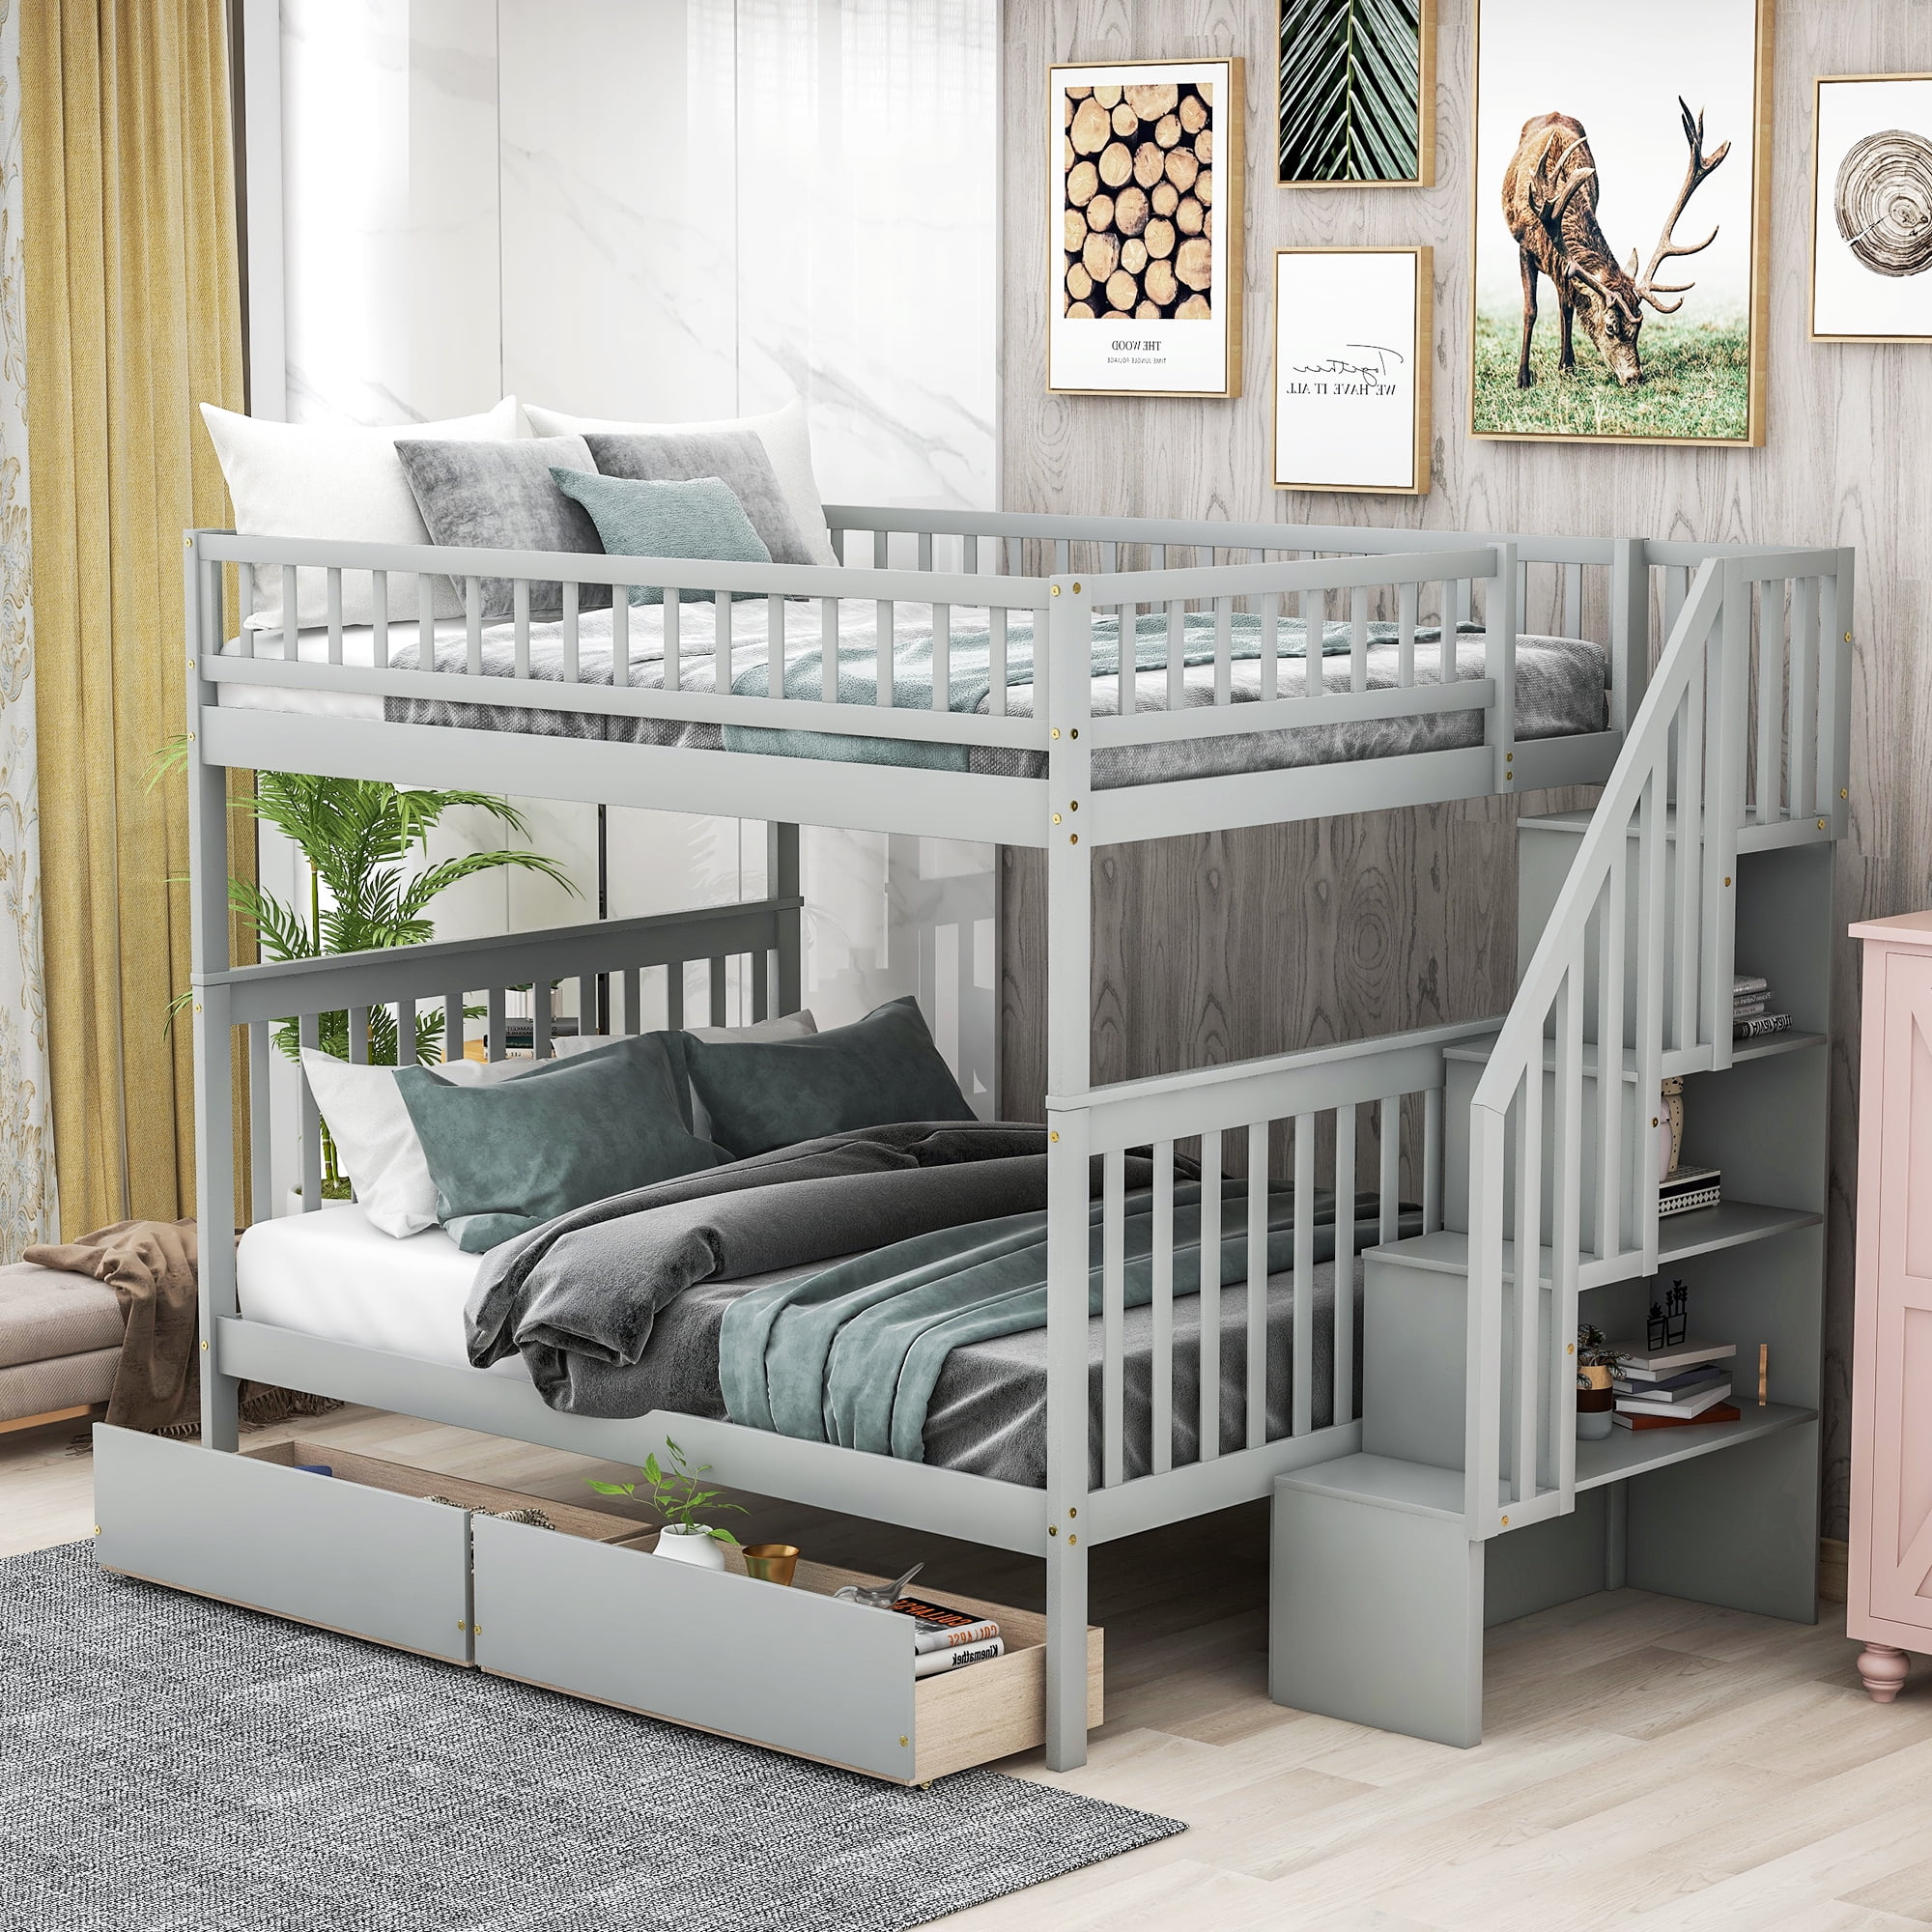 Euroco Full Over Bunk Bed With, Drawers For Under Bunk Beds